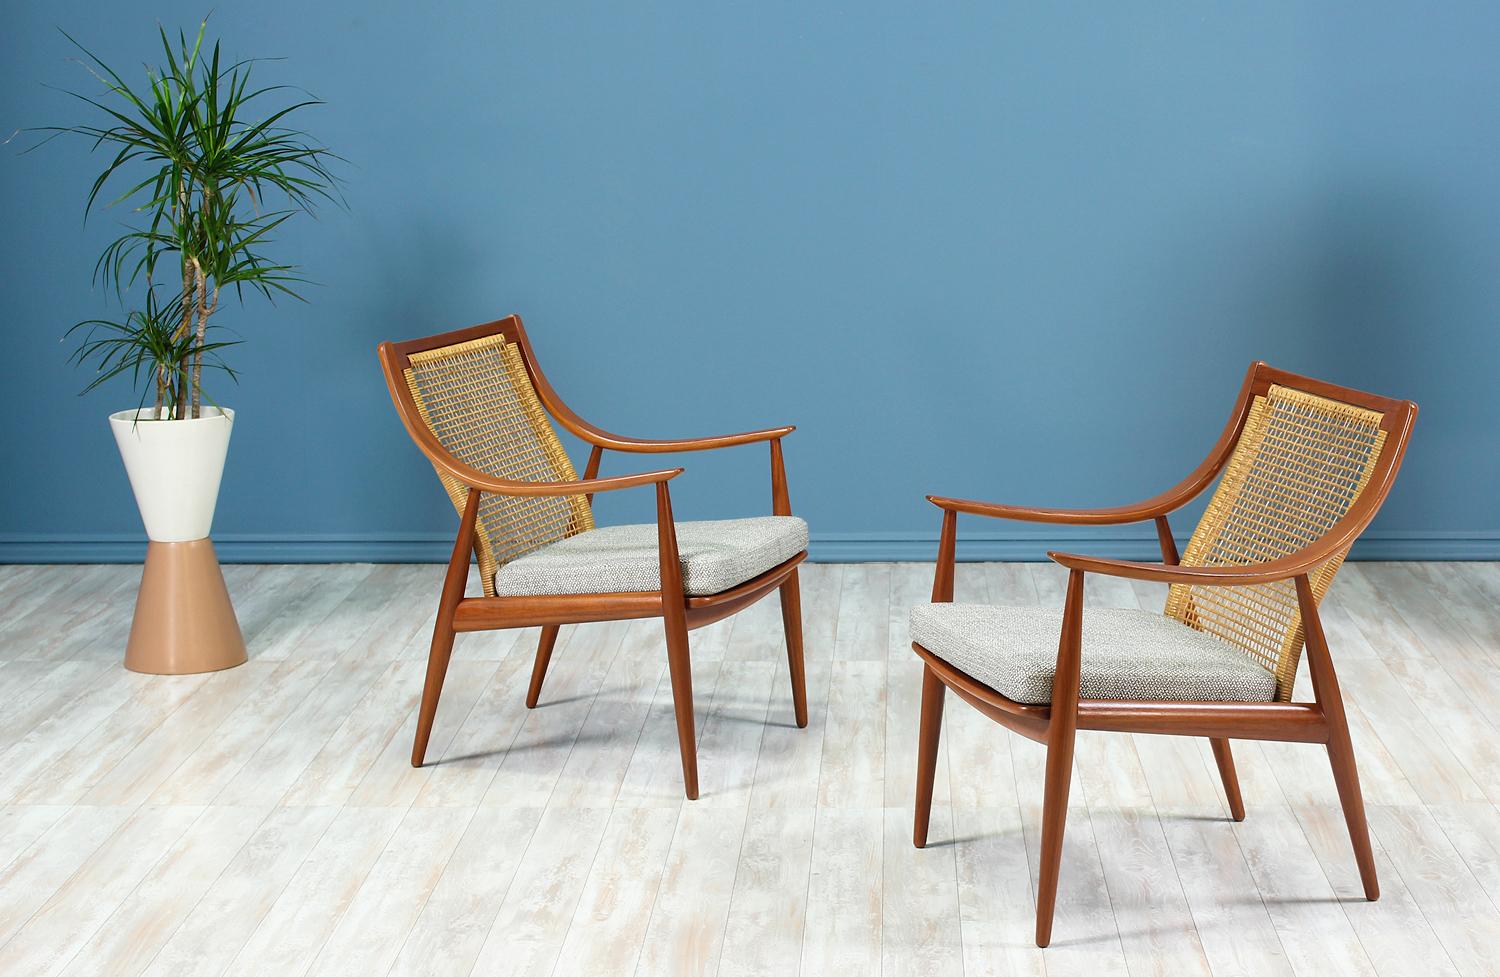 Pair of lounge chairs designed by Peter Hvidt & Orla Mølgaard-Nielsen for France & Daverkosen in Denmark circa 1950’s. Crafted using a few studio techniques: laminated bentwood curvilinear arms and beautifully exposed joinery, this pair of iconic